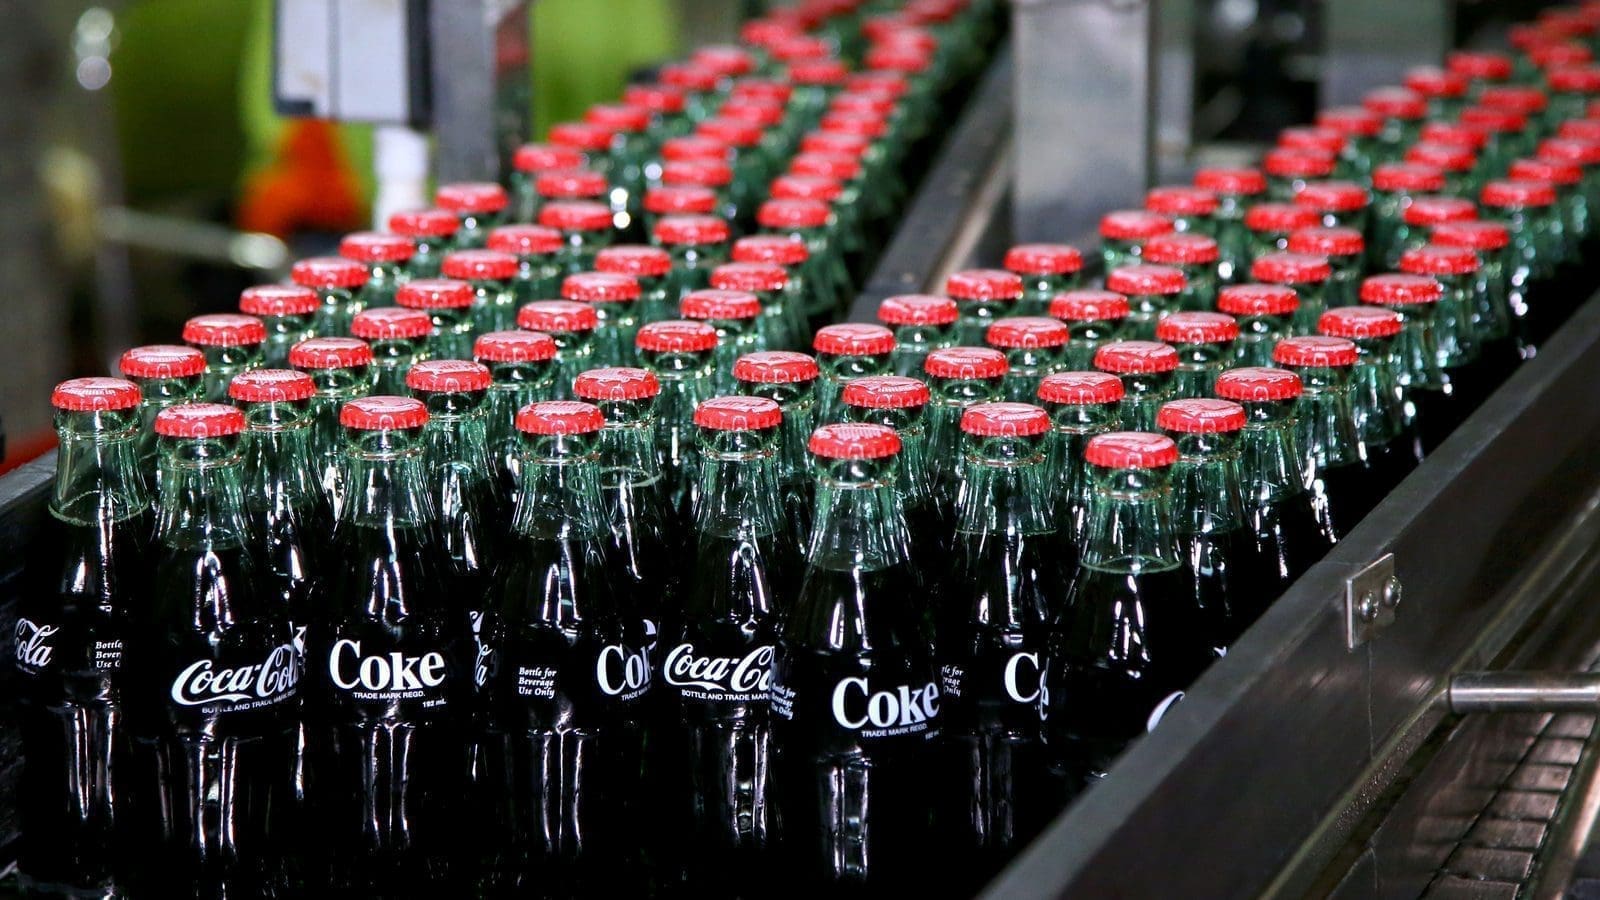 Coca-Cola Hong Kong launches newly designed glass bottles as part of sustainability agenda